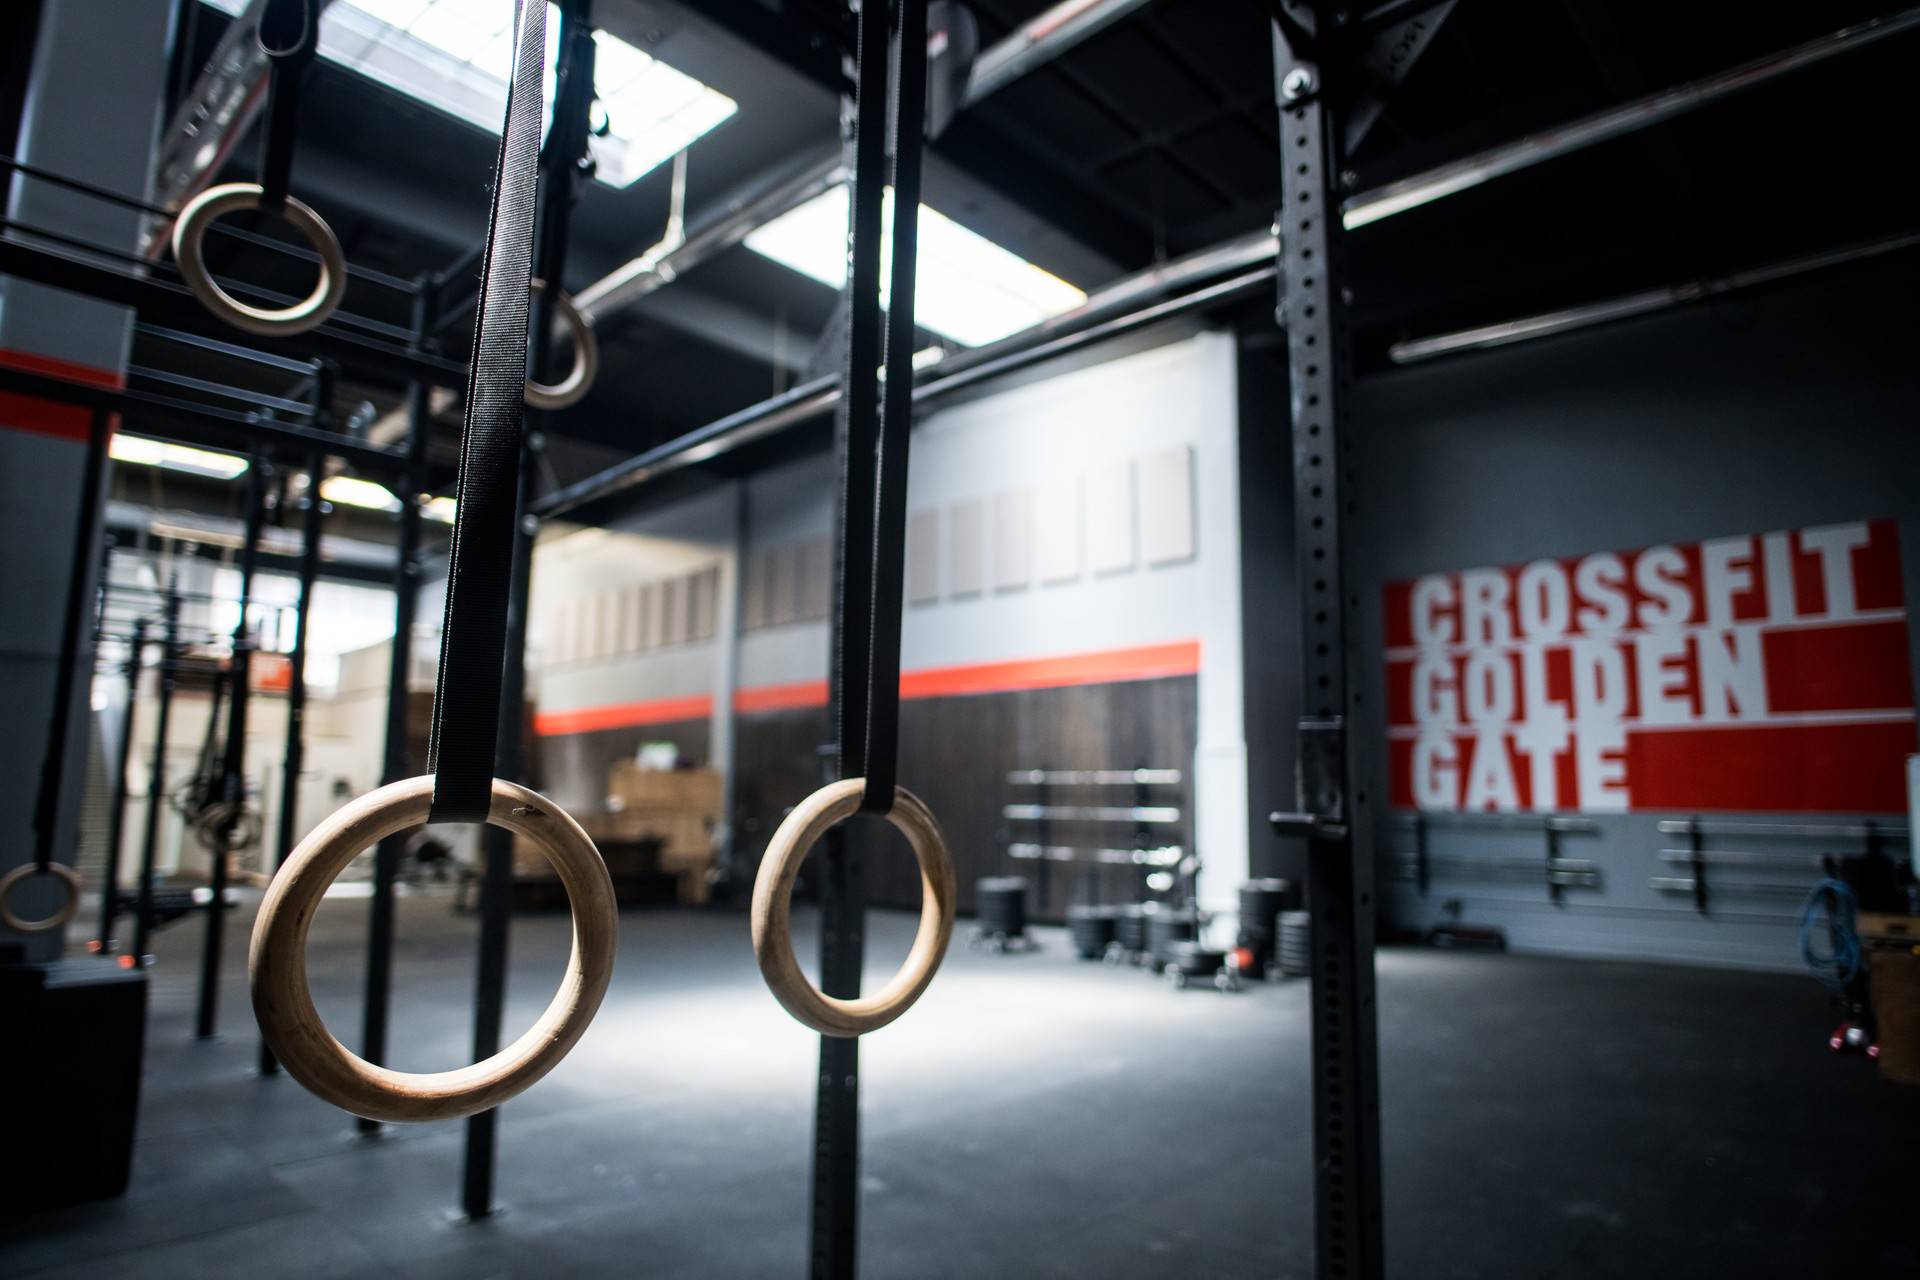 CrossFit Golden Gate, which typically hosts private and group classes, has been closed since the shelter-in-place ordinance went into effect for San Francisco. Beth LaBerge/KQED